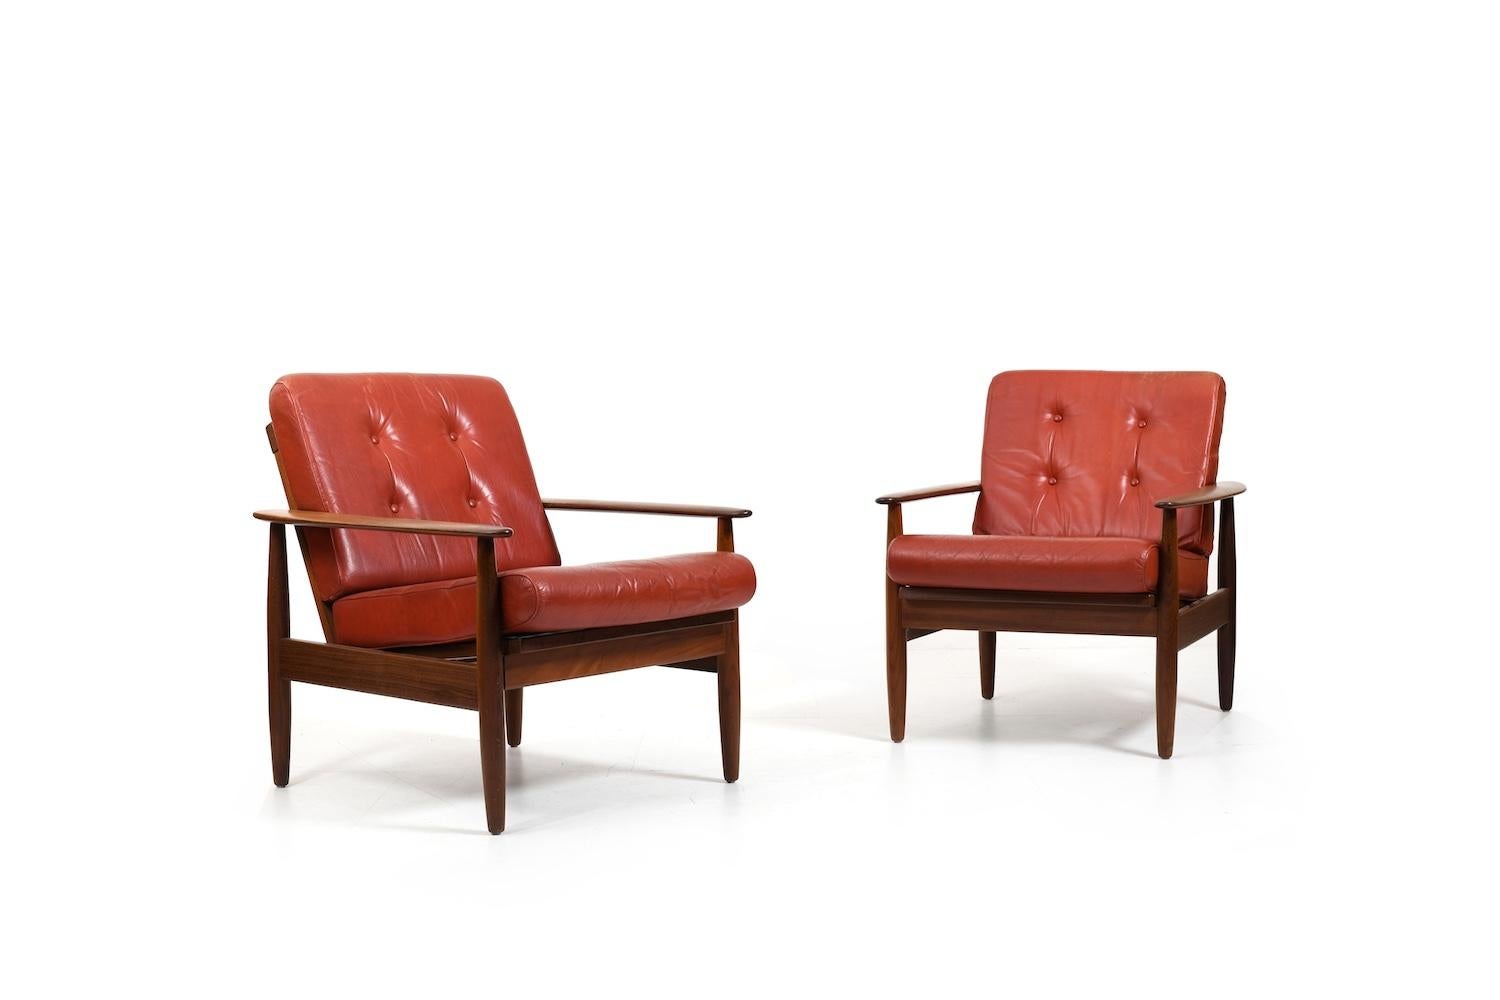 Pair of scandinavian easychairs in teak and original cushions with Indian red leather. Very good vintage condition, ready to use. 1960s.Price for the set.